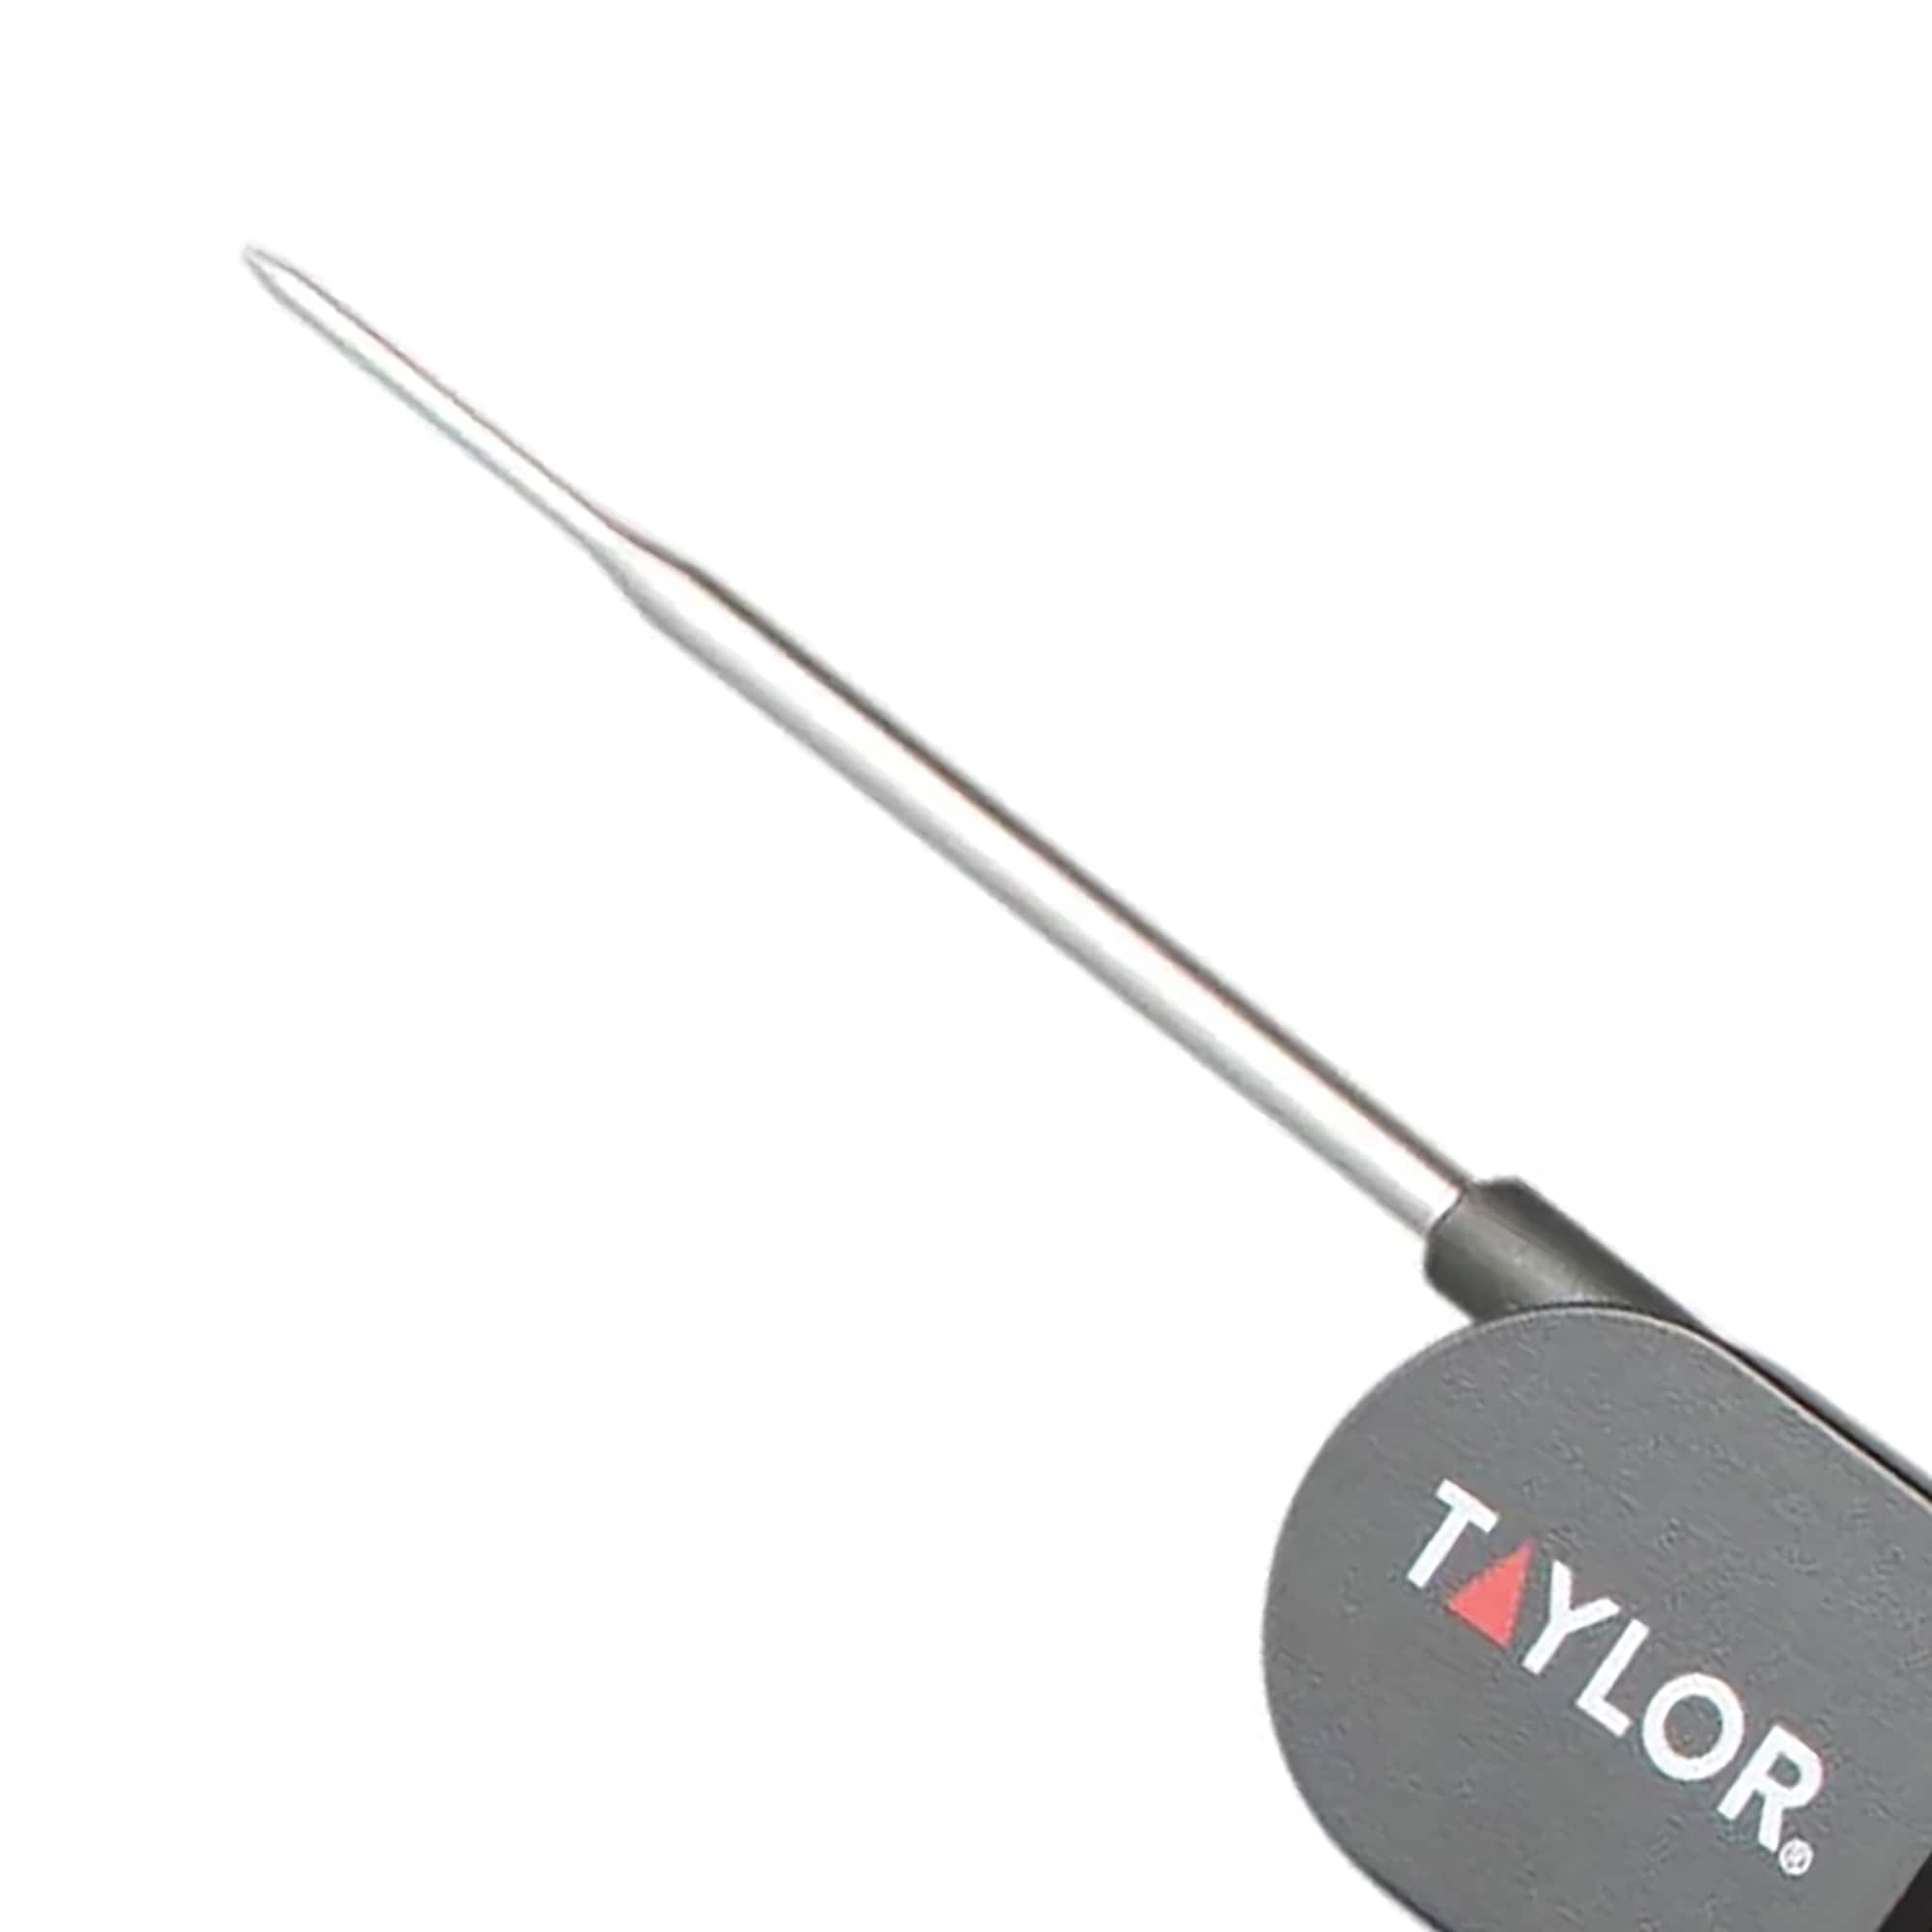 Taylor Folding Meat Thermometer & Bottle Opener